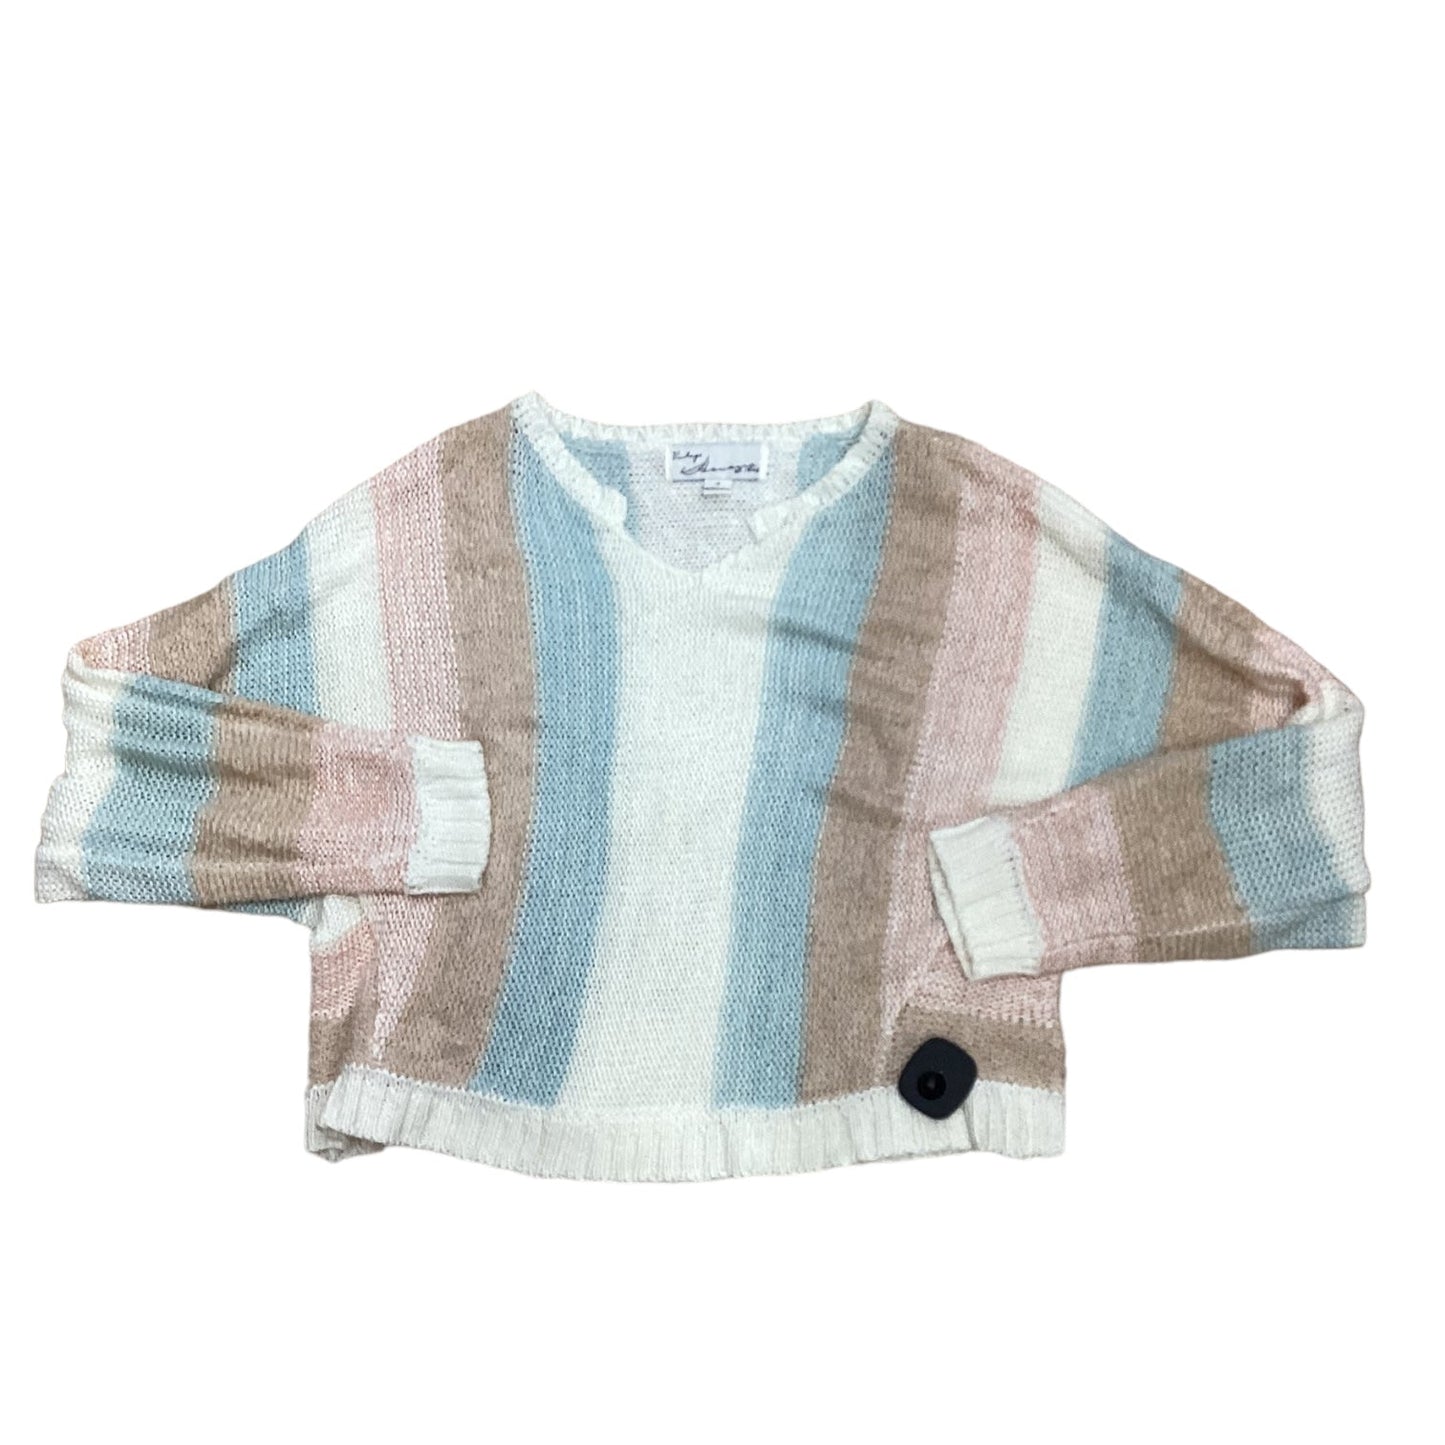 Blue & Pink Sweater Clothes Mentor, Size S